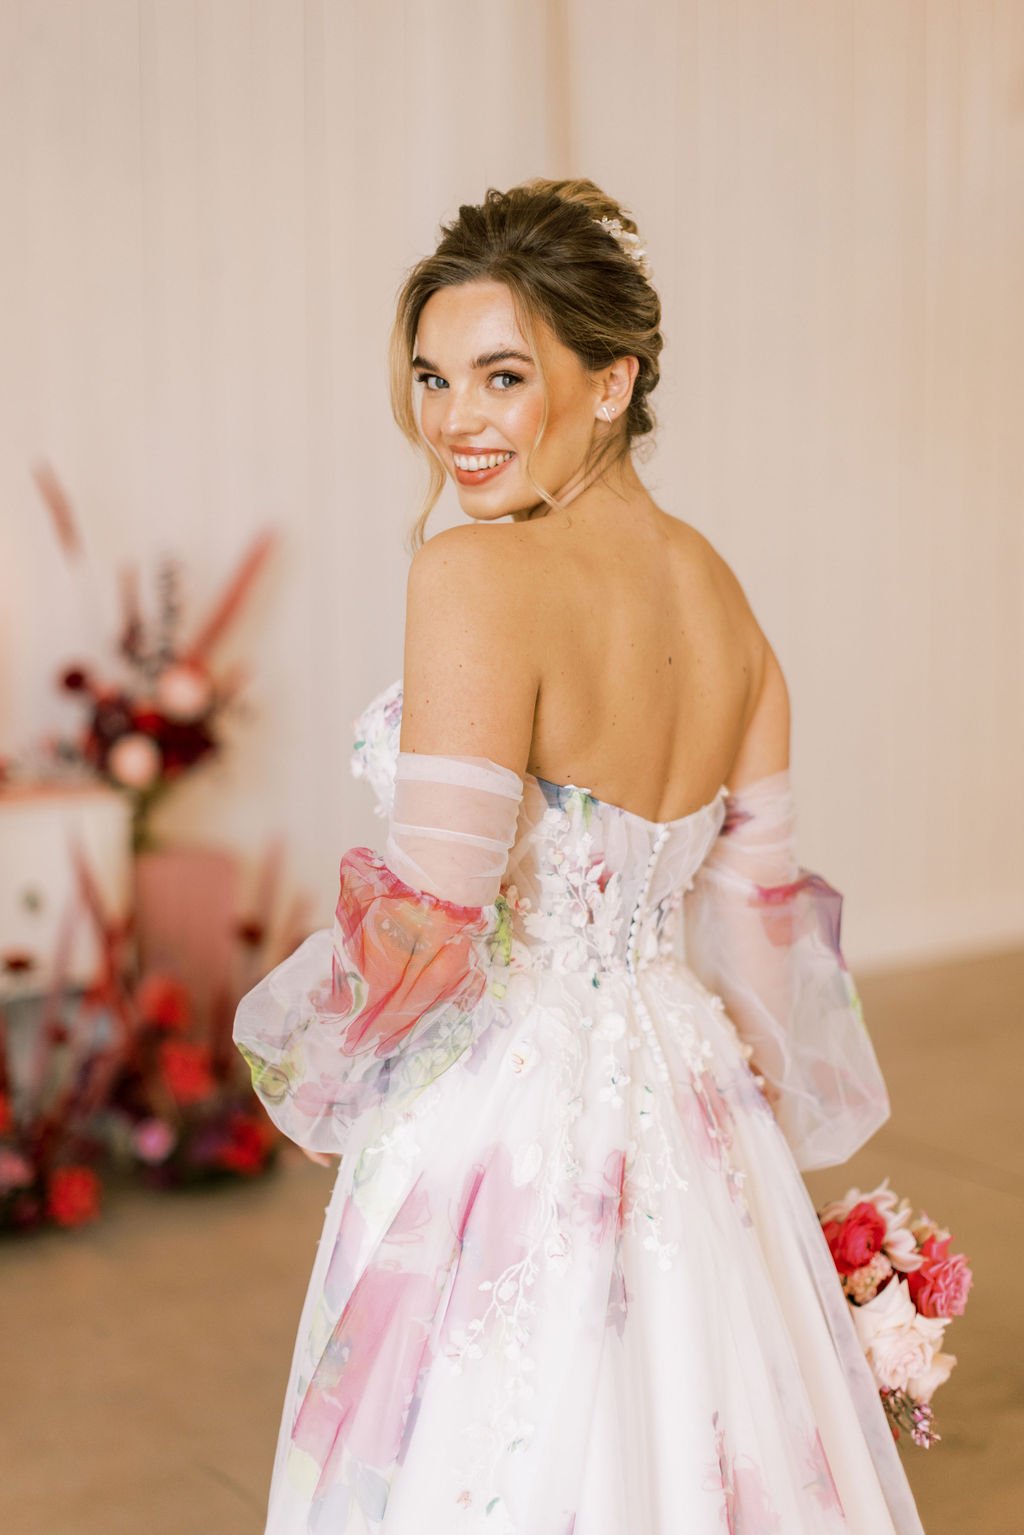 I'm want a colorful dress to wear as my wedding dress. Will I regret not  wearing white/ivory? : r/weddingdress